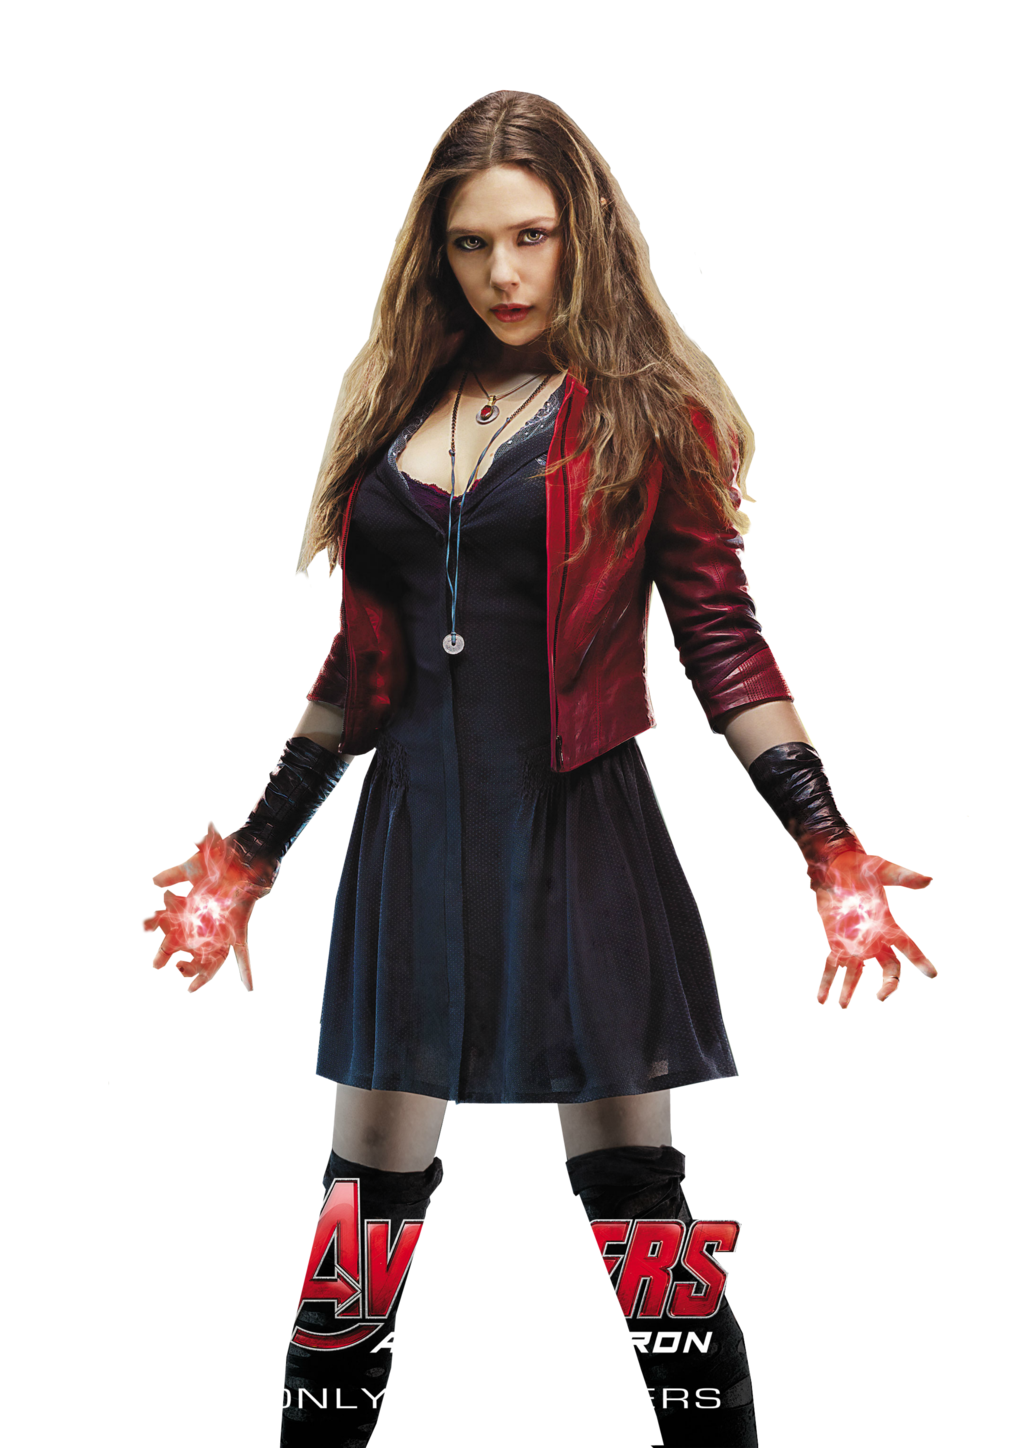 Scarlet Witch Backgrounds, Compatible - PC, Mobile, Gadgets| 1024x1448 px